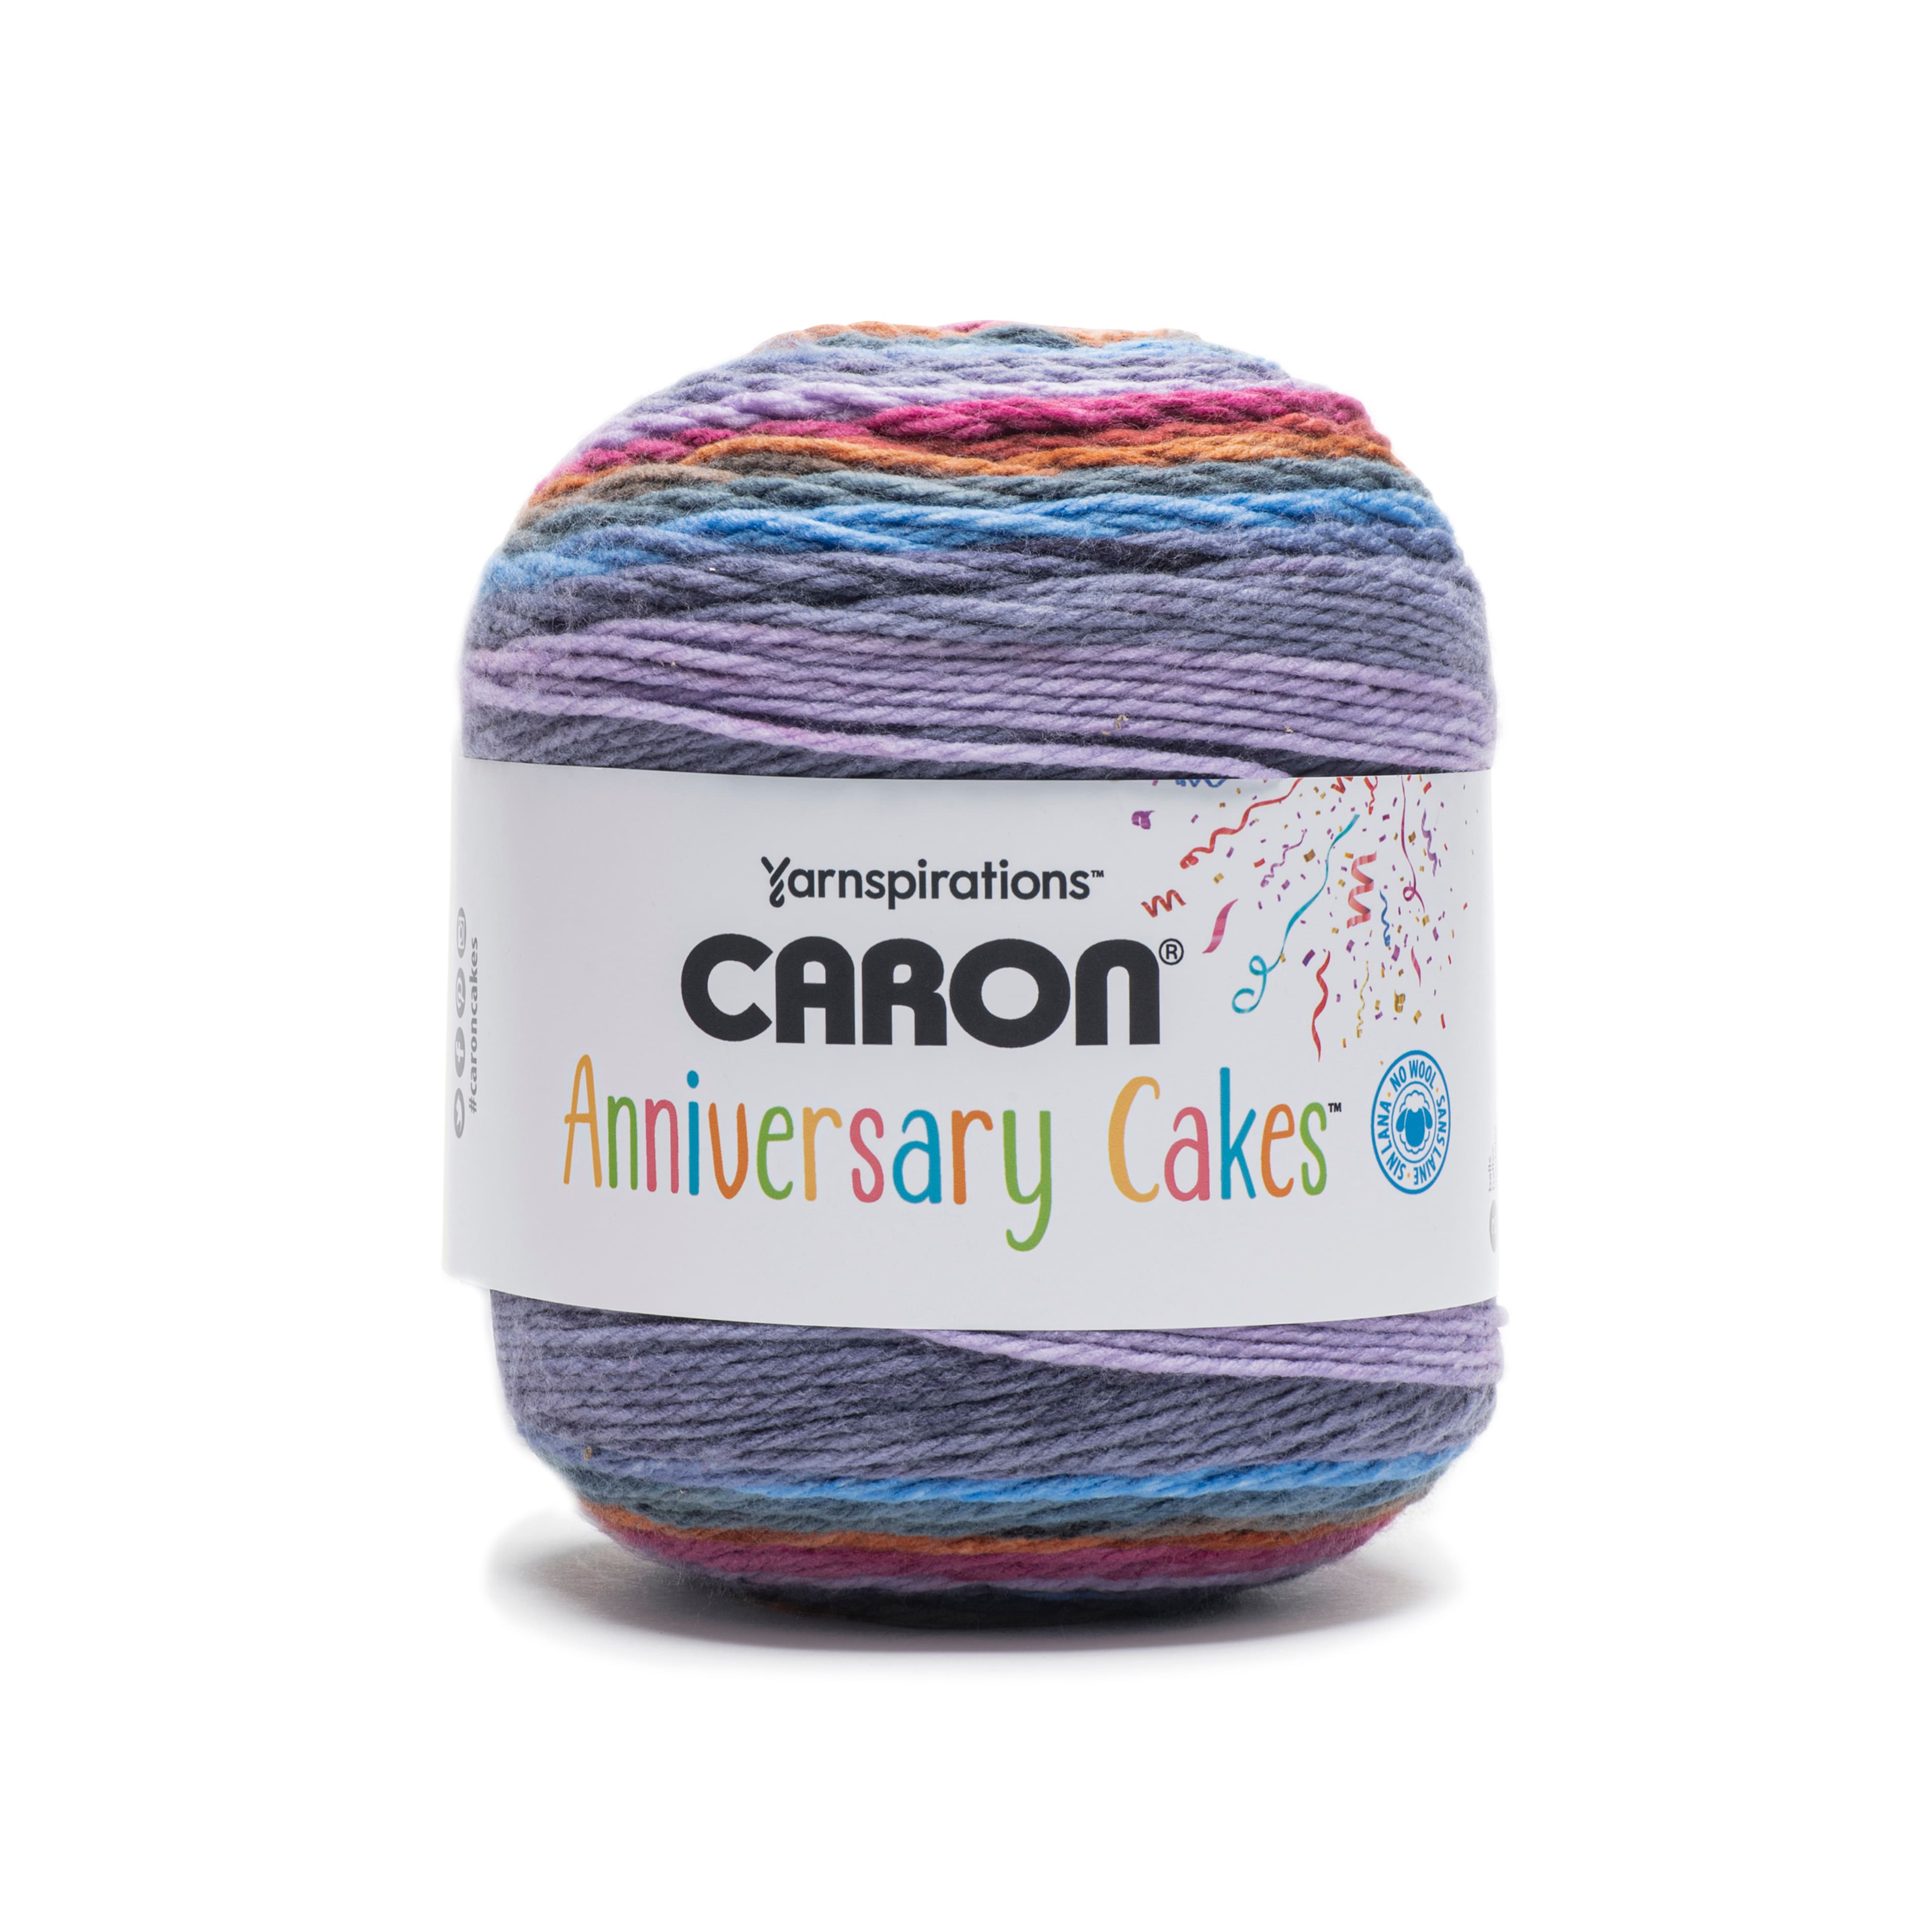 Caron Anniversary Cakes Yarn in Sweet/Sour Dots | 35.3 oz | Michaels